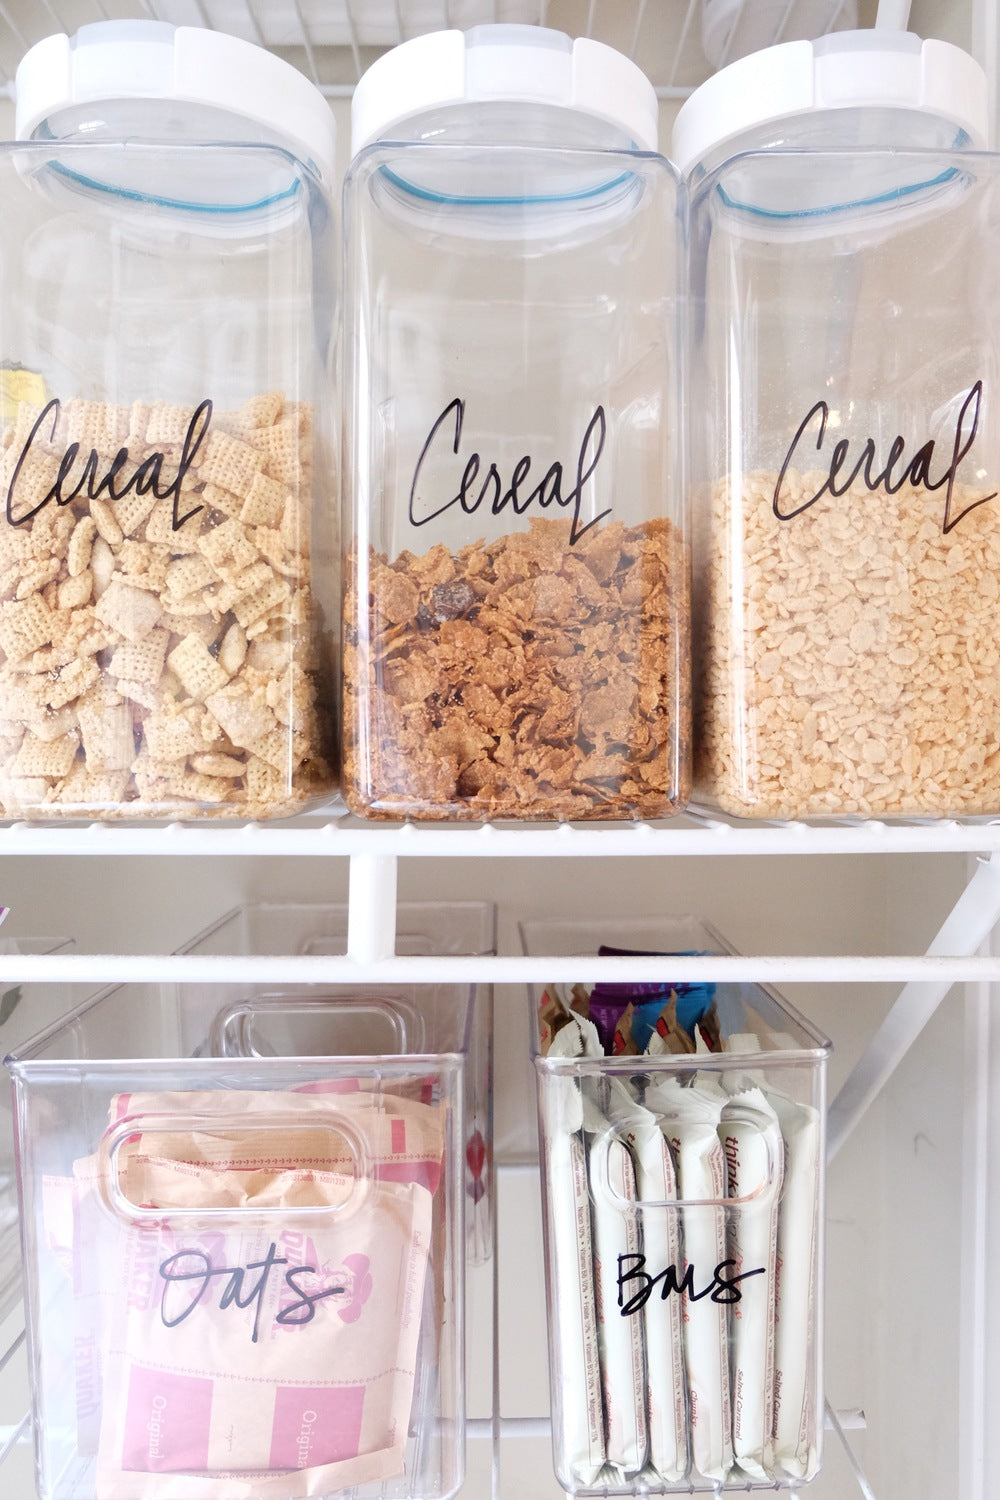 [ THE TIPS ] 5 STEPS TO AN ORGANIZED PANTRY